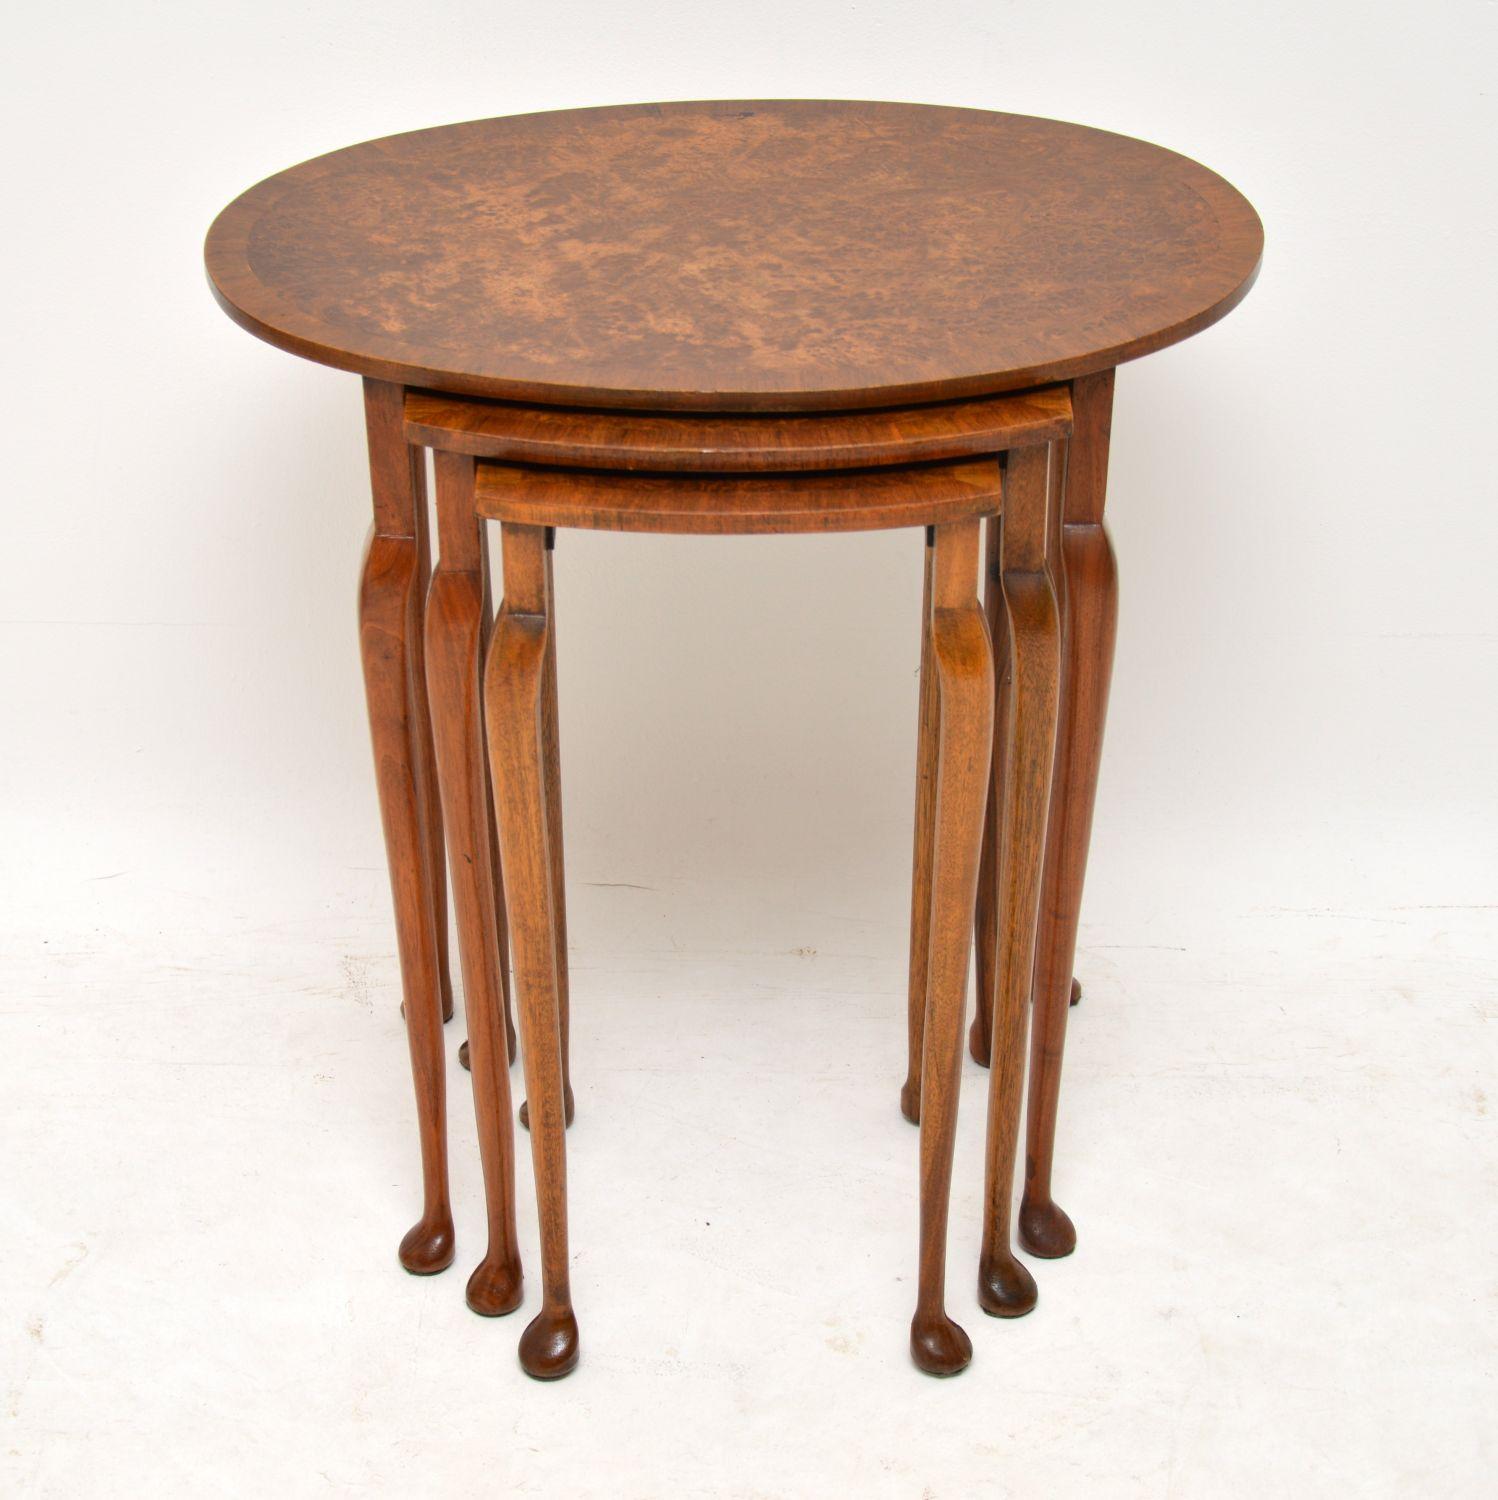 Antique burr walnut nest of tables dating from circa 1920s-1930s period and in excellent condition, having just been French polished. The table tops are a tight burr walnut with cross banded edges and they sit on Queen Anne legs.

Measures: Width